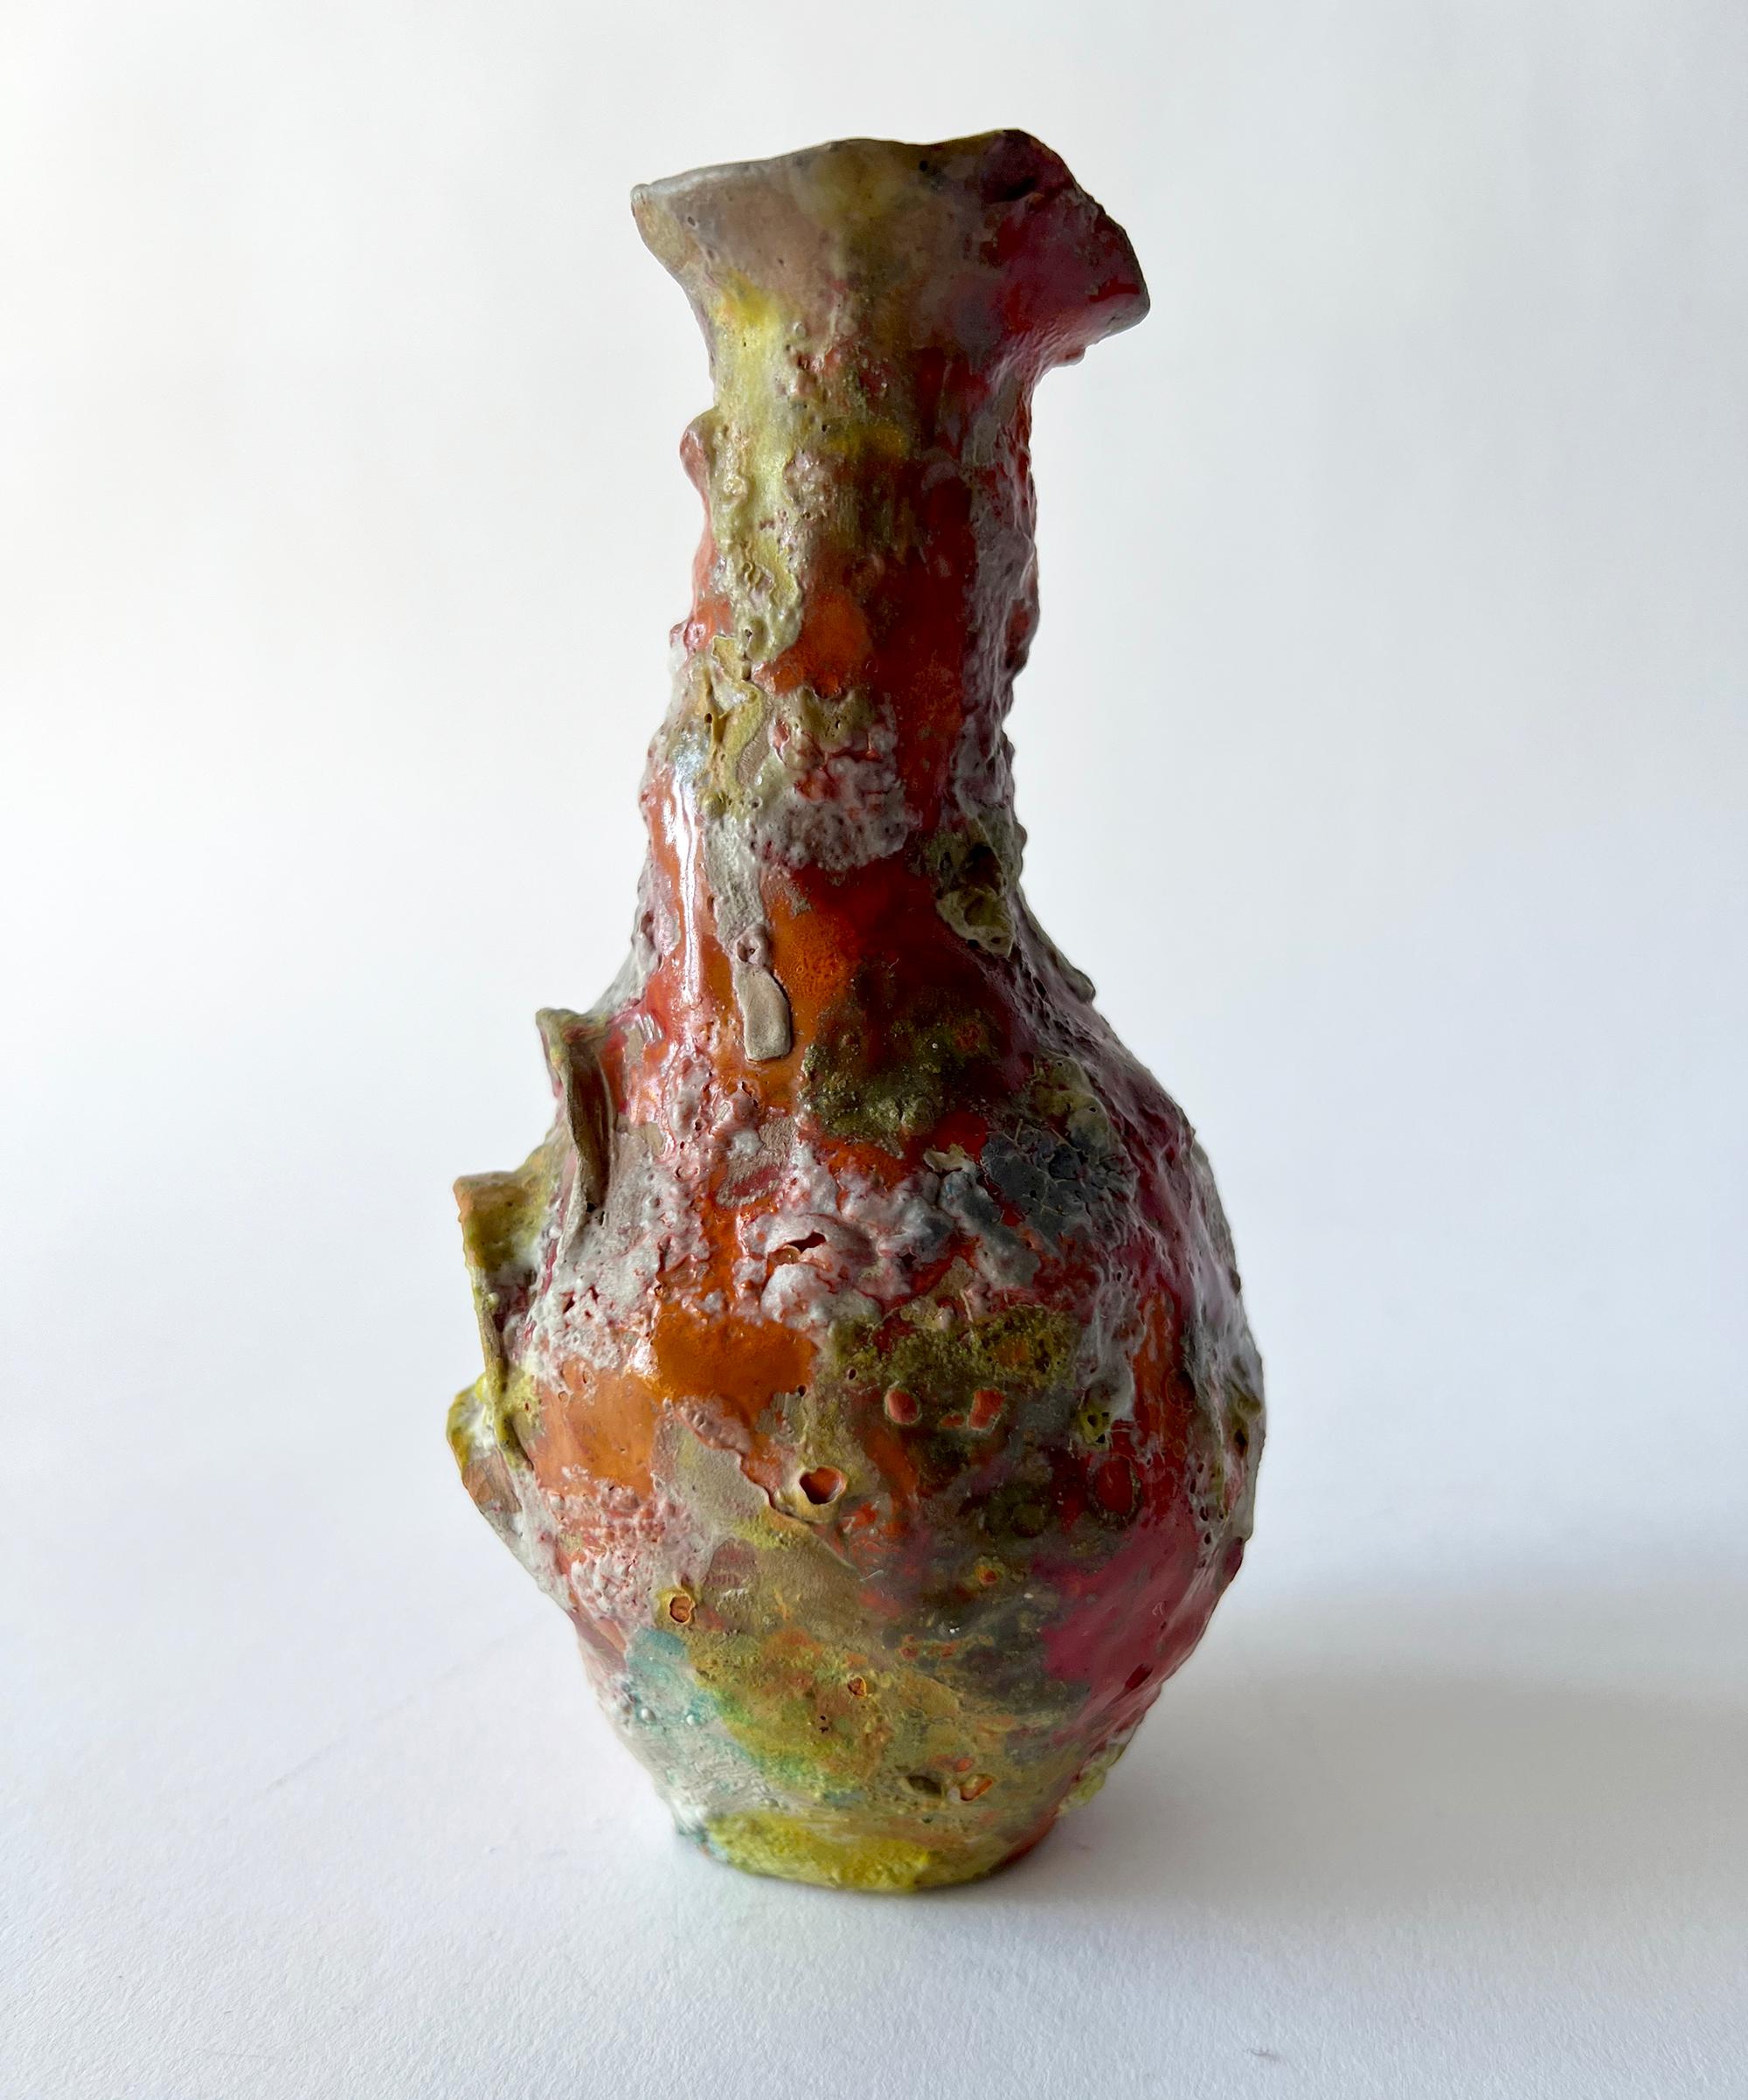 Small, foamy glazed ewer created by master ceramist Marcello Fantoni of Florence, Italy. Piece measures 6.5